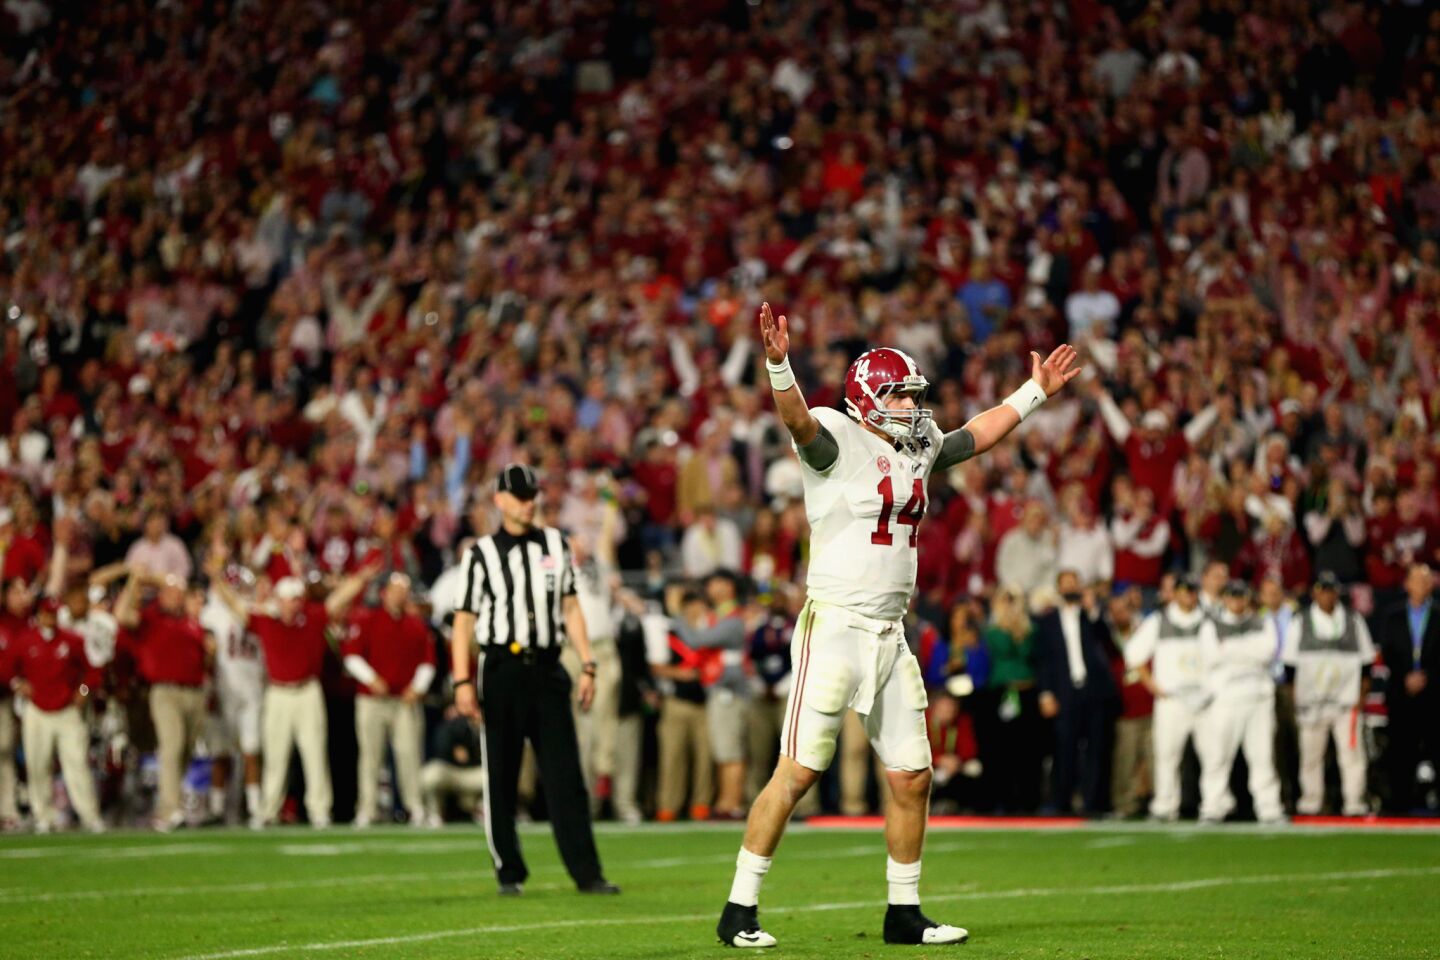 Alabama quarterback Jake Coker celebrates after Derrick Henry's touchodwn in the final minute of the fourth quarter.